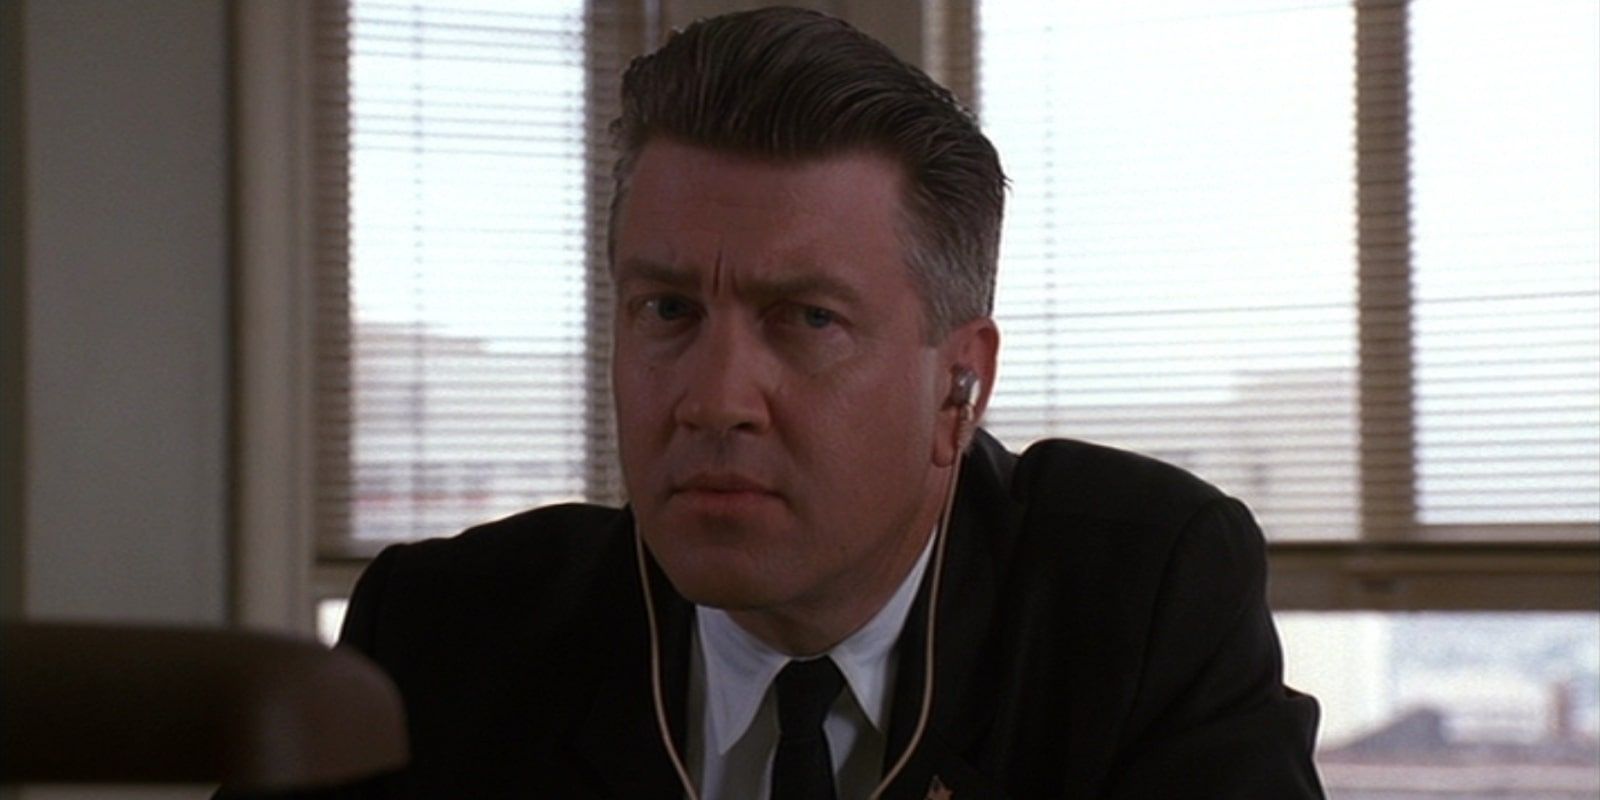 Twin Peaks Which Character Are You Based On Your Zodiac